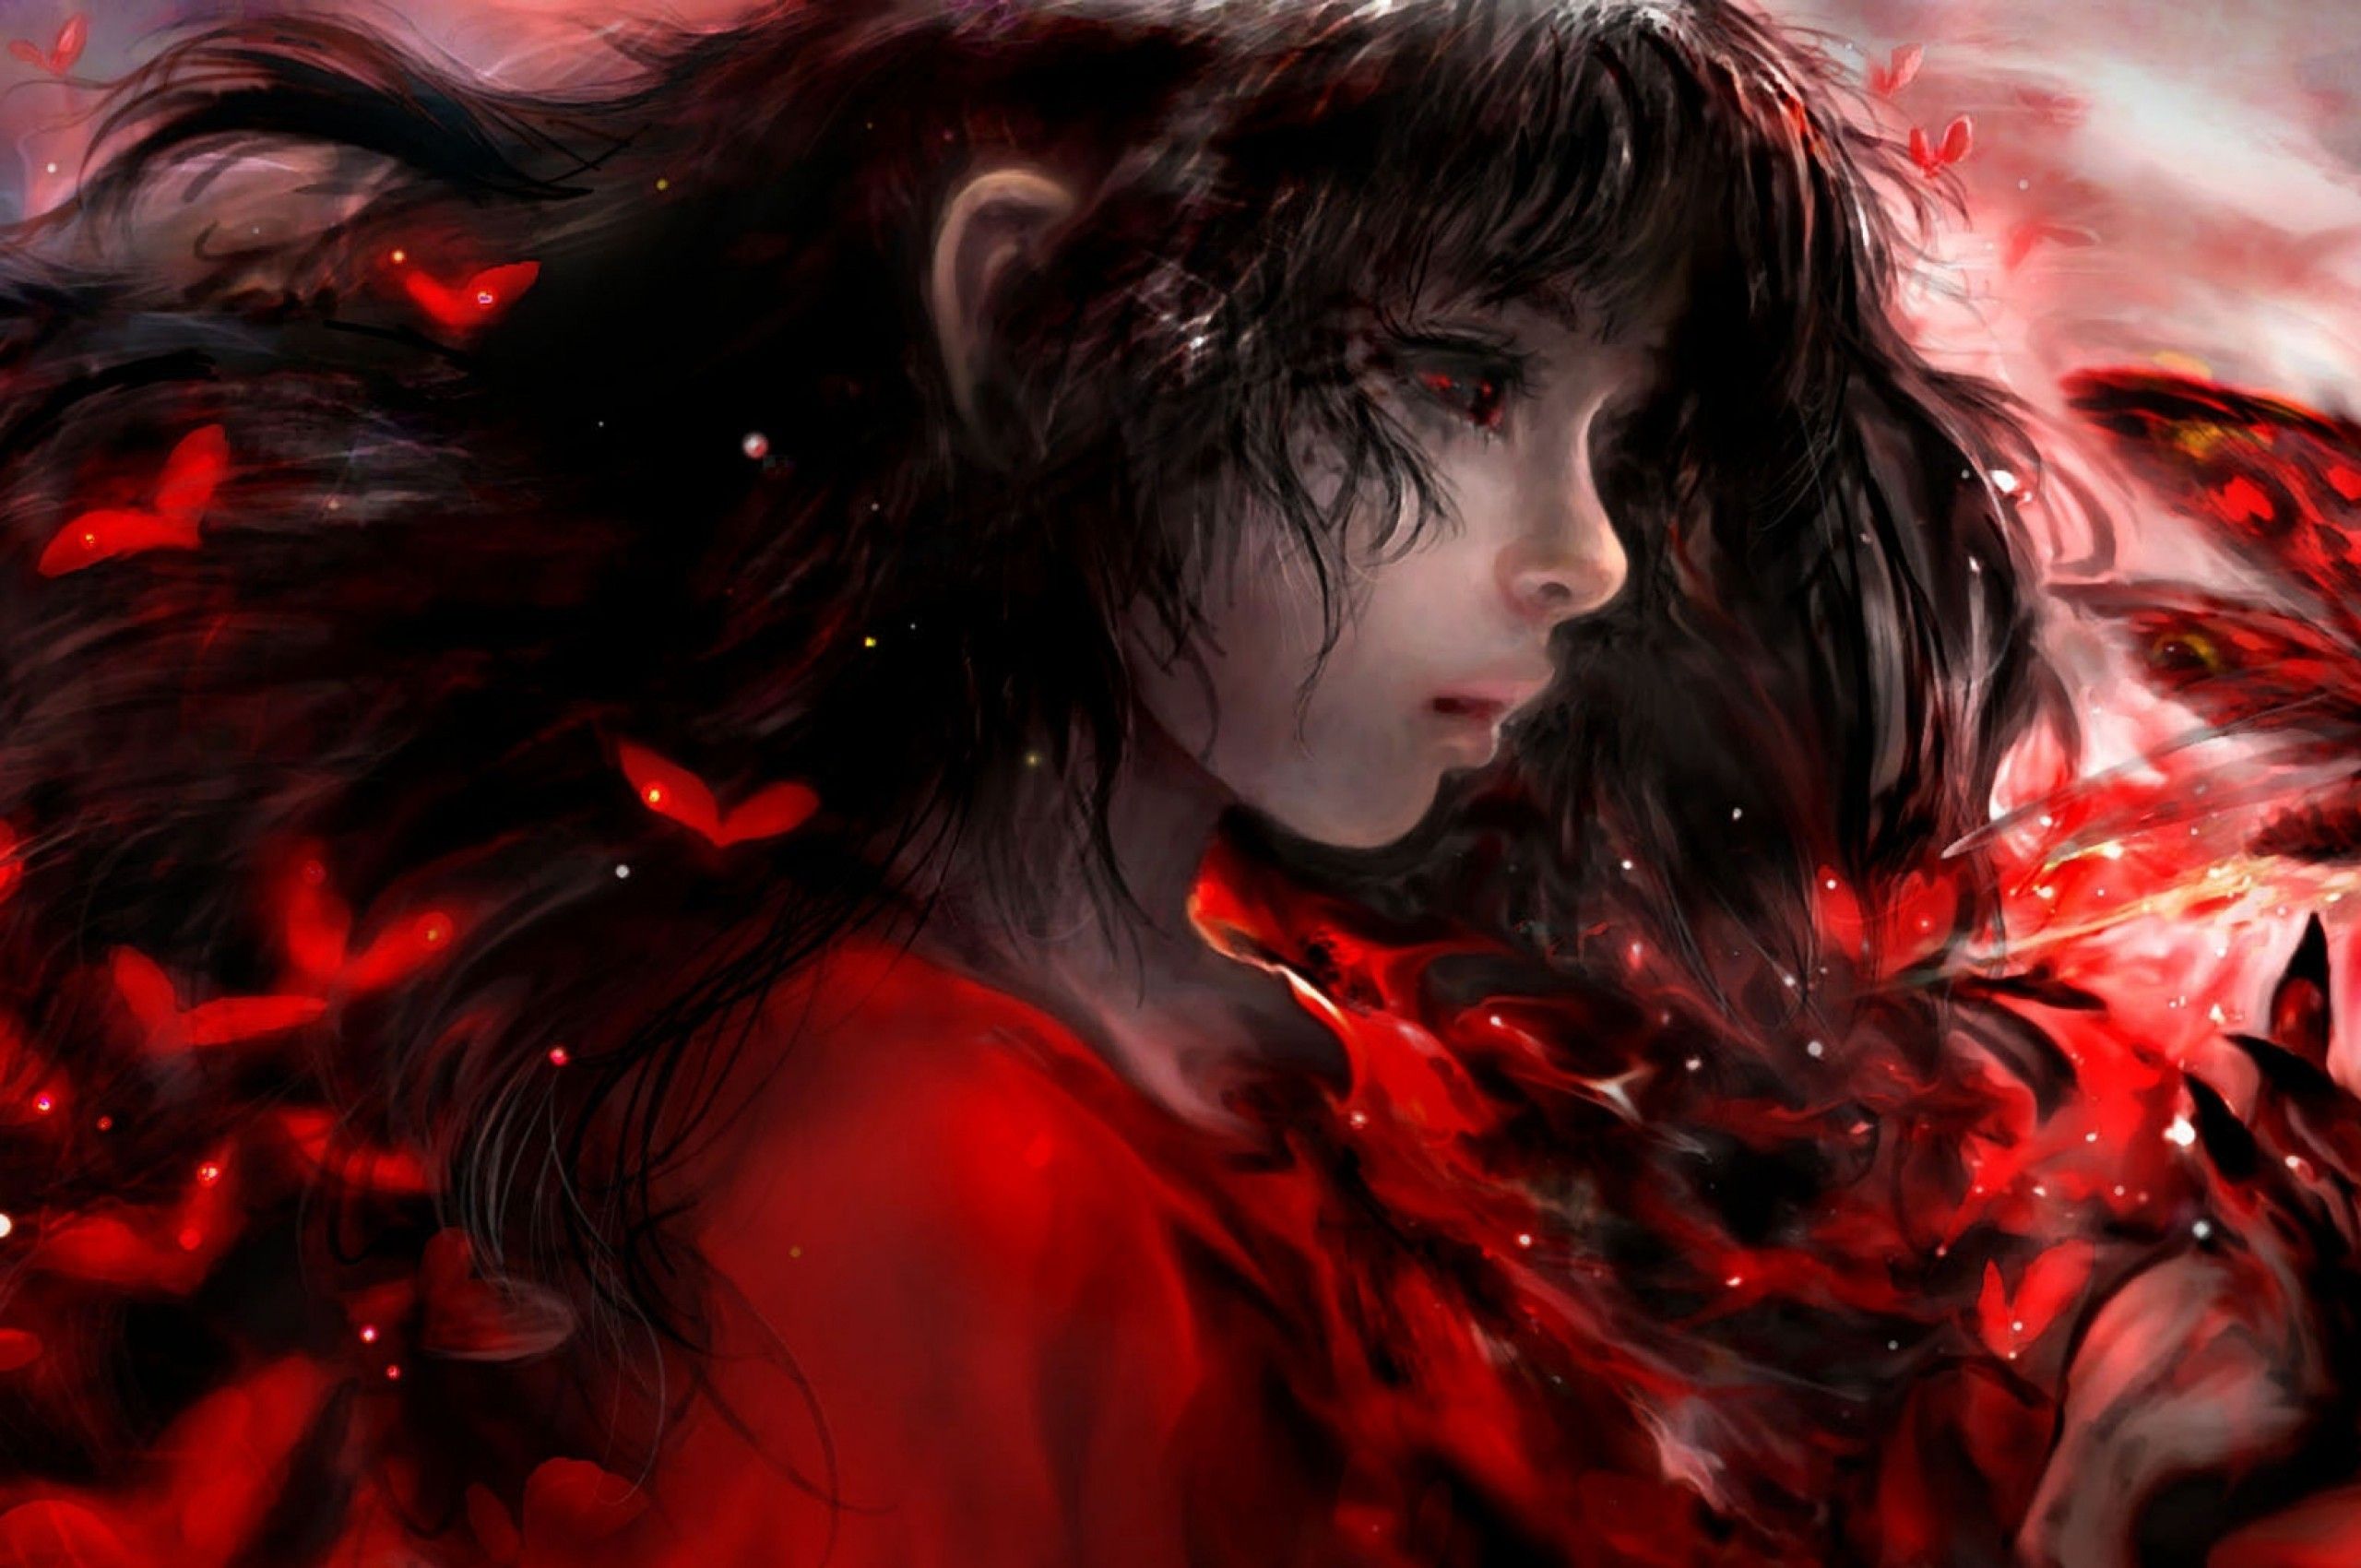 Download 2560x1700 Demon Girl, Red Eyes, Red Butterflies, Black Hair, Profile View Wallpaper for Chromebook Pixel